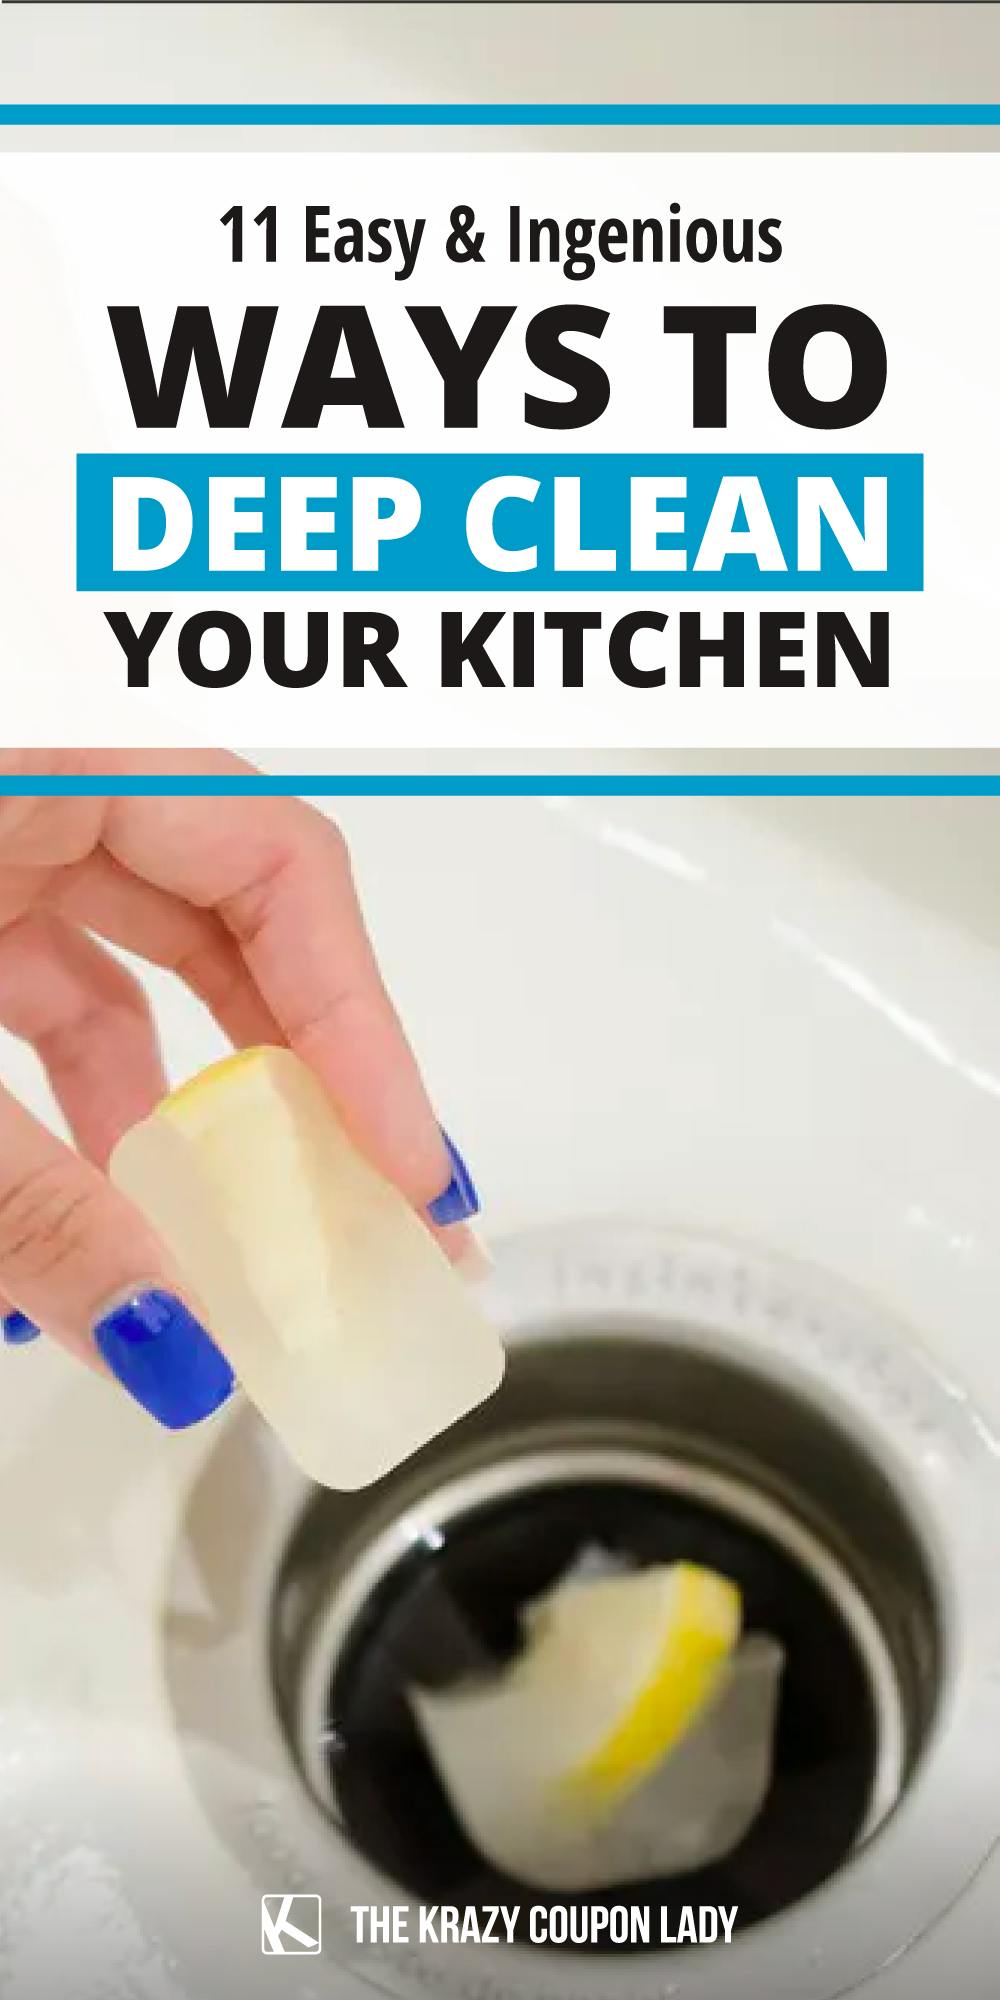 11 Easy & Ingenious Ways to Deep Clean Your Kitchen